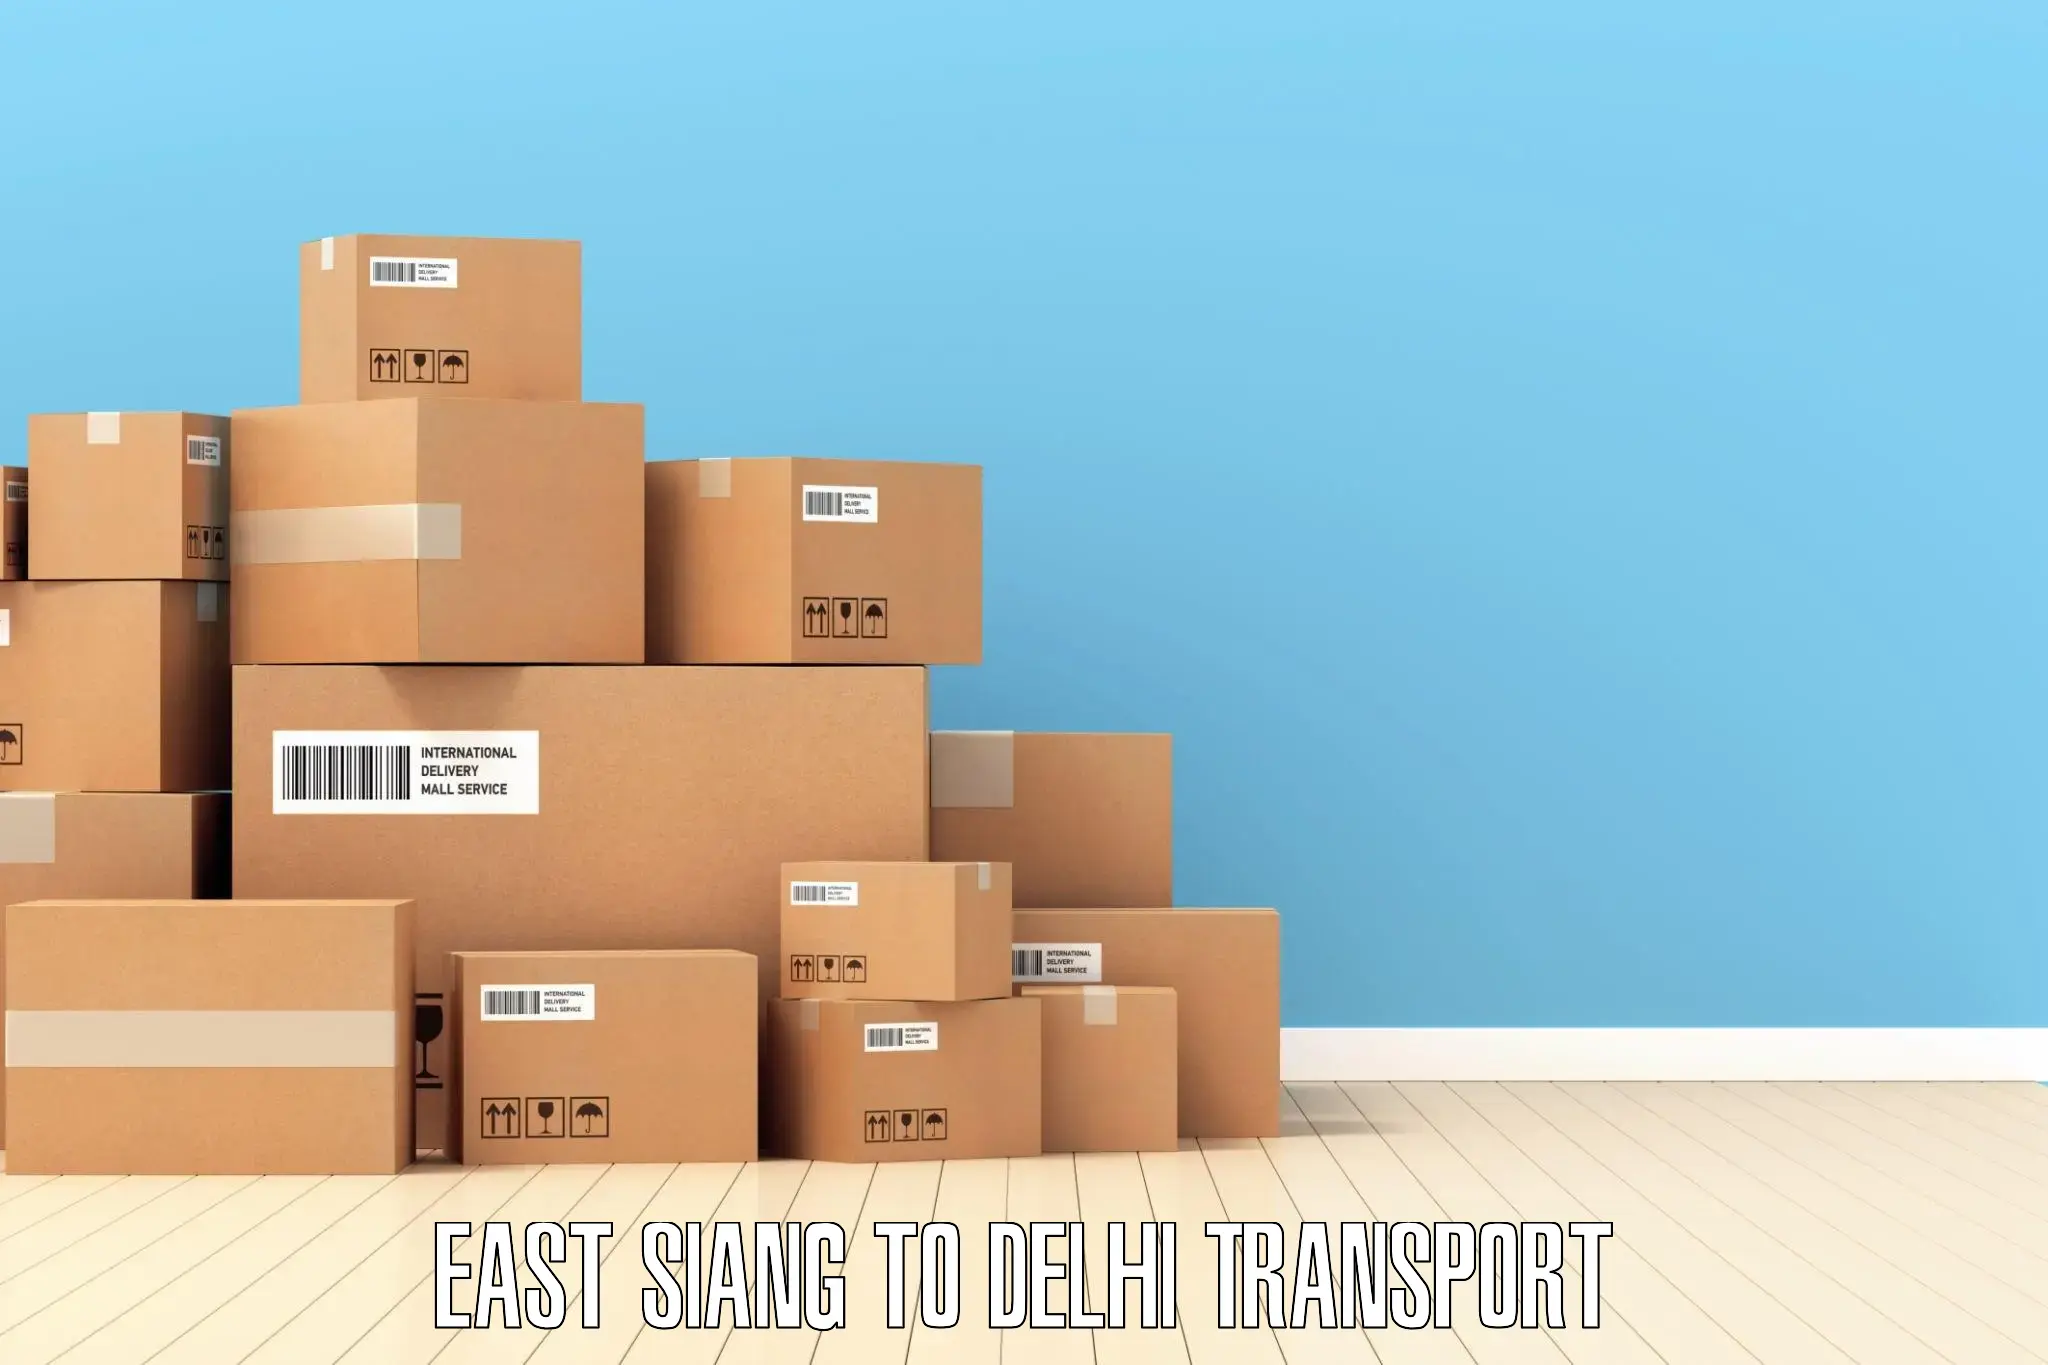 Daily parcel service transport East Siang to Kalkaji